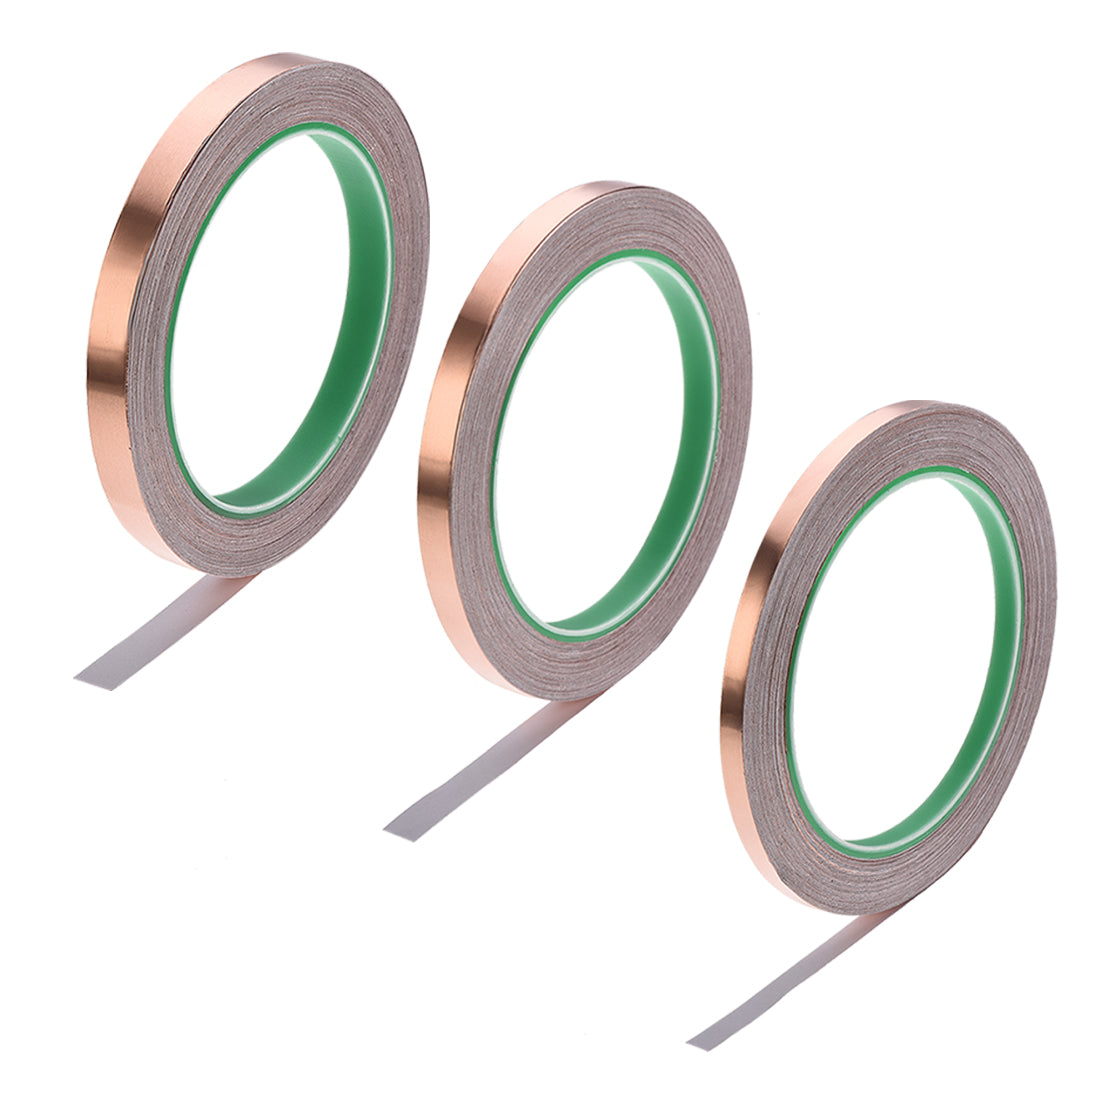 uxcell Uxcell 6mm,8mm,10mm Copper Foil Tape for EMI EMF and RFI Shielding 20m/65.6ft 1 Set